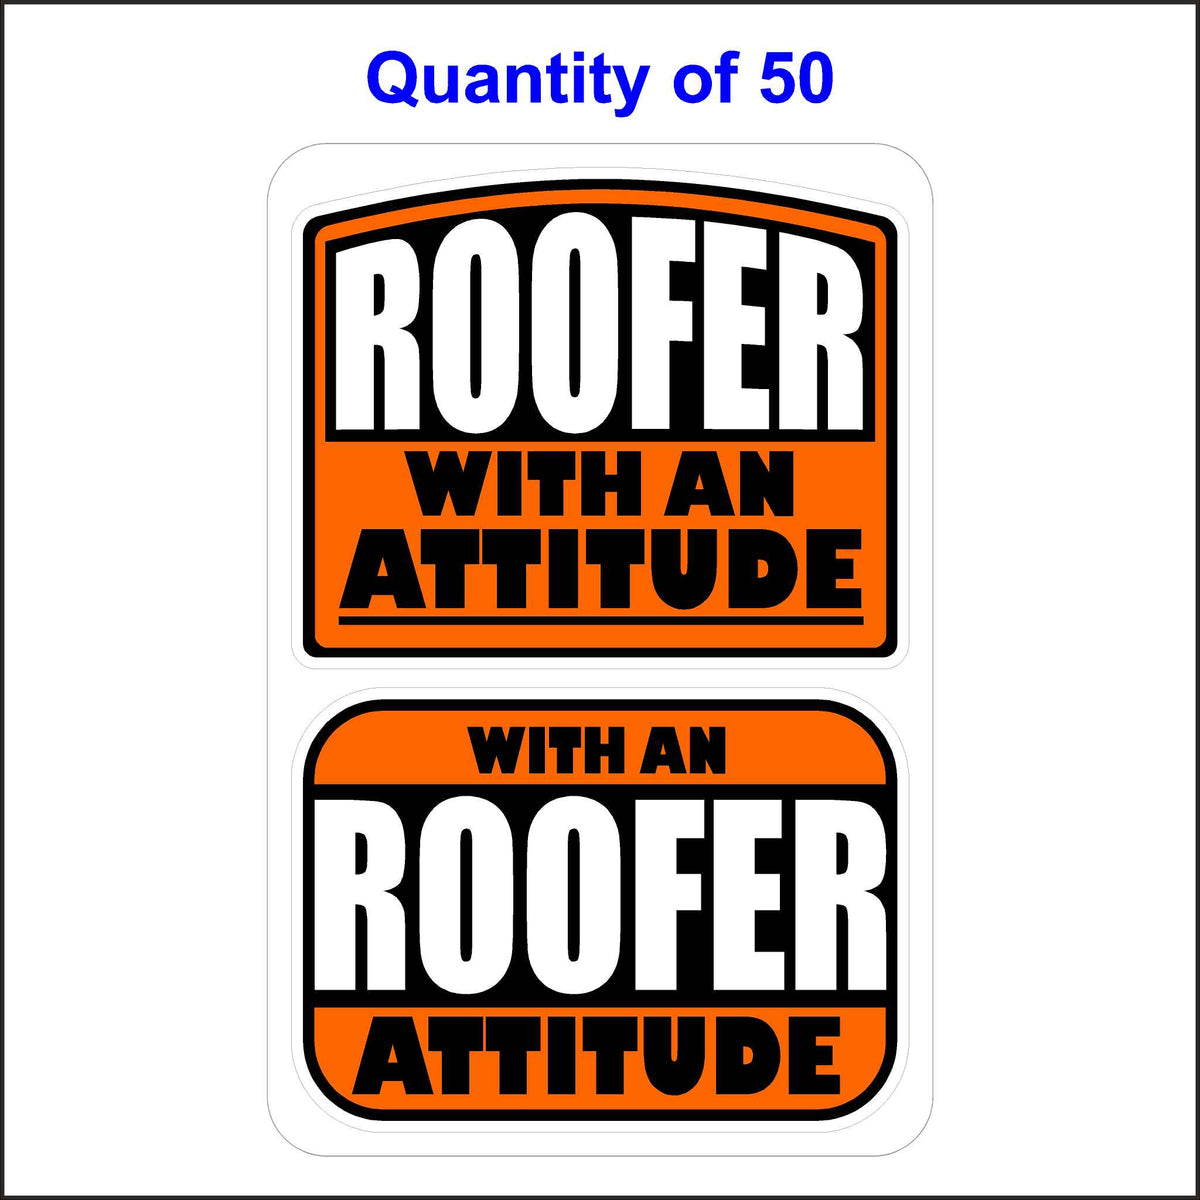 Roofer With An Attitude Stickers 50 Quantity.